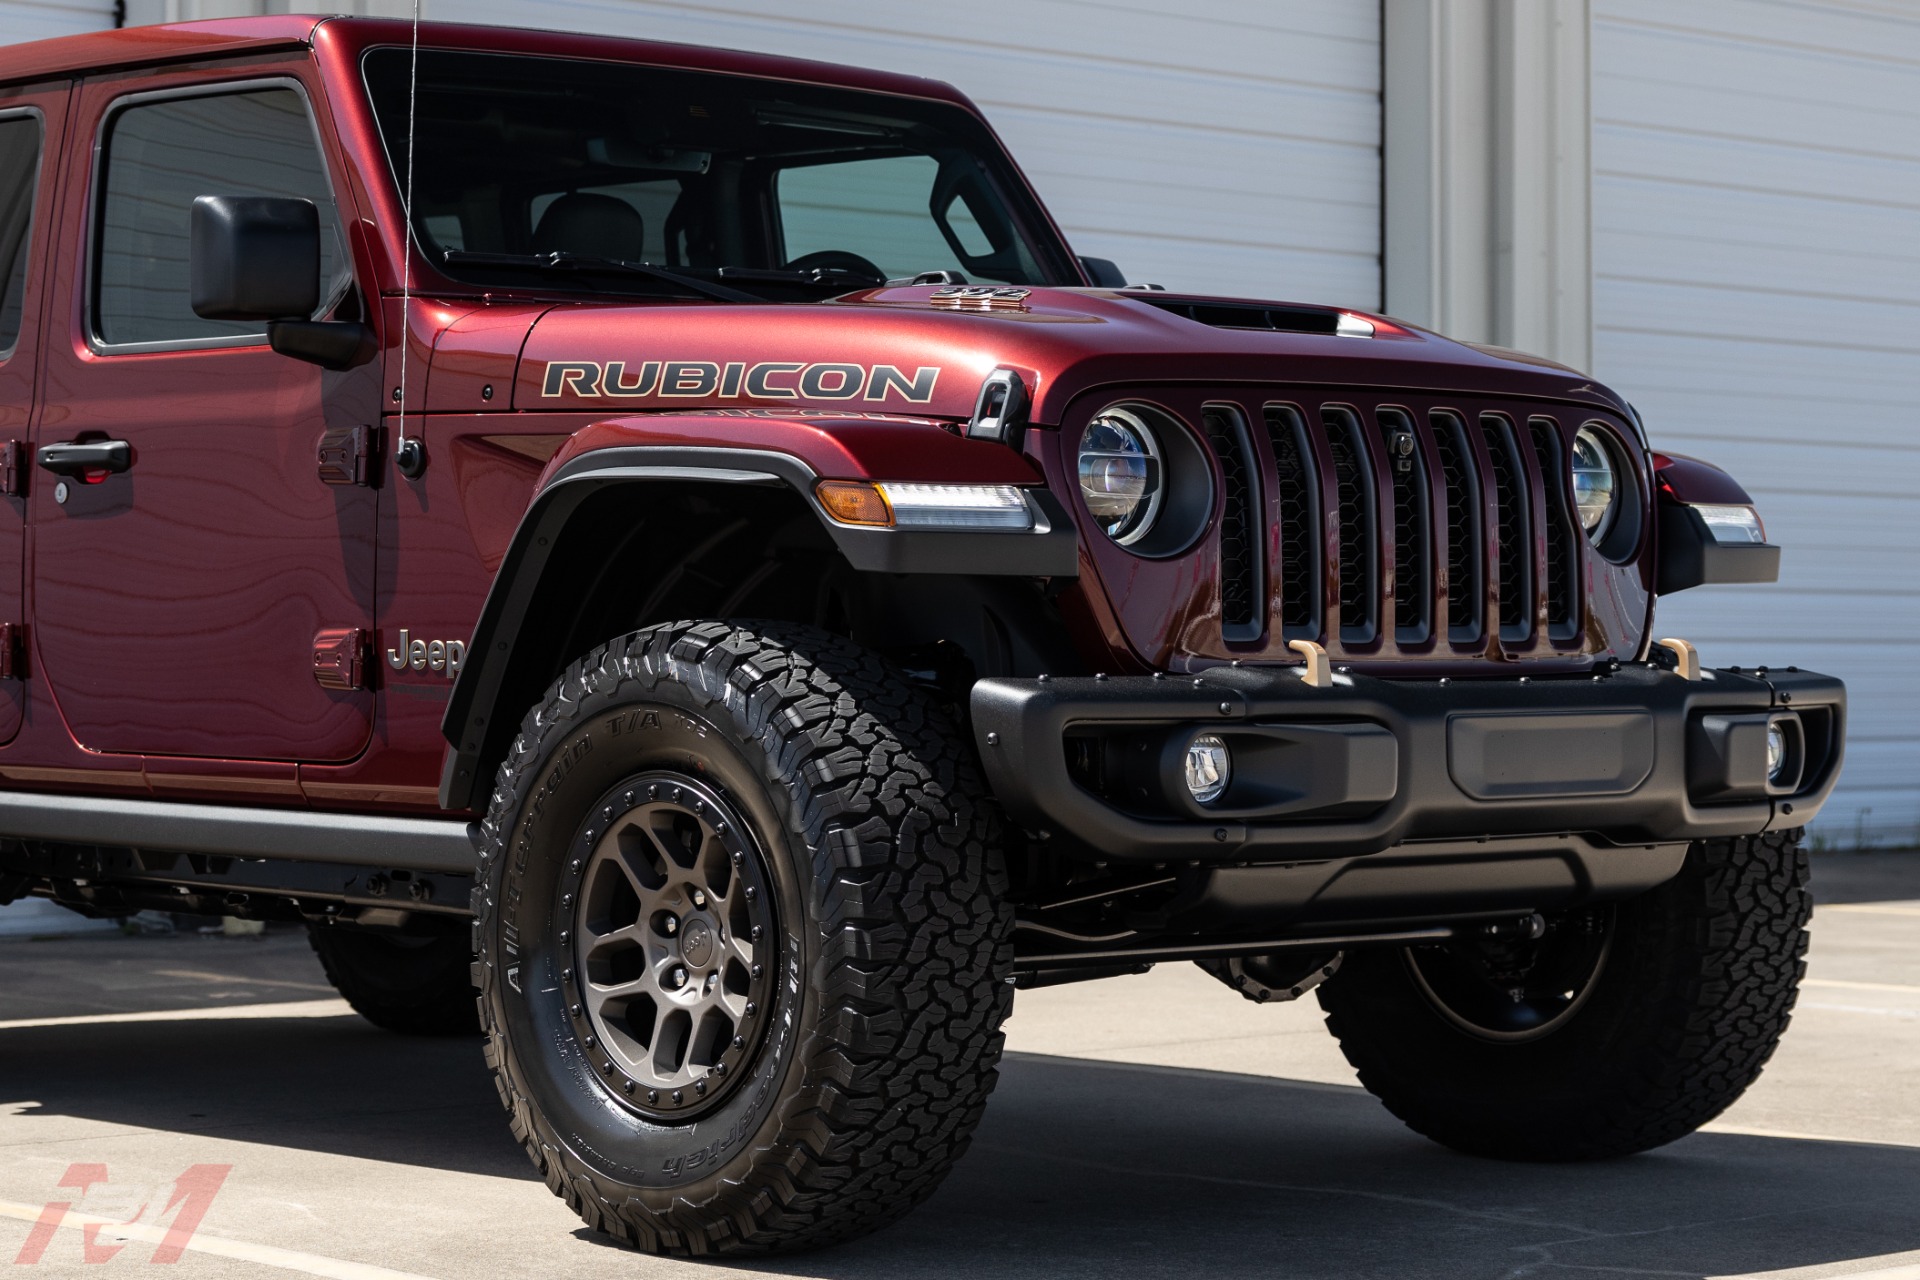 Used 2021 Jeep Wrangler Unlimited Rubicon 392 Xtreme Recon Package For